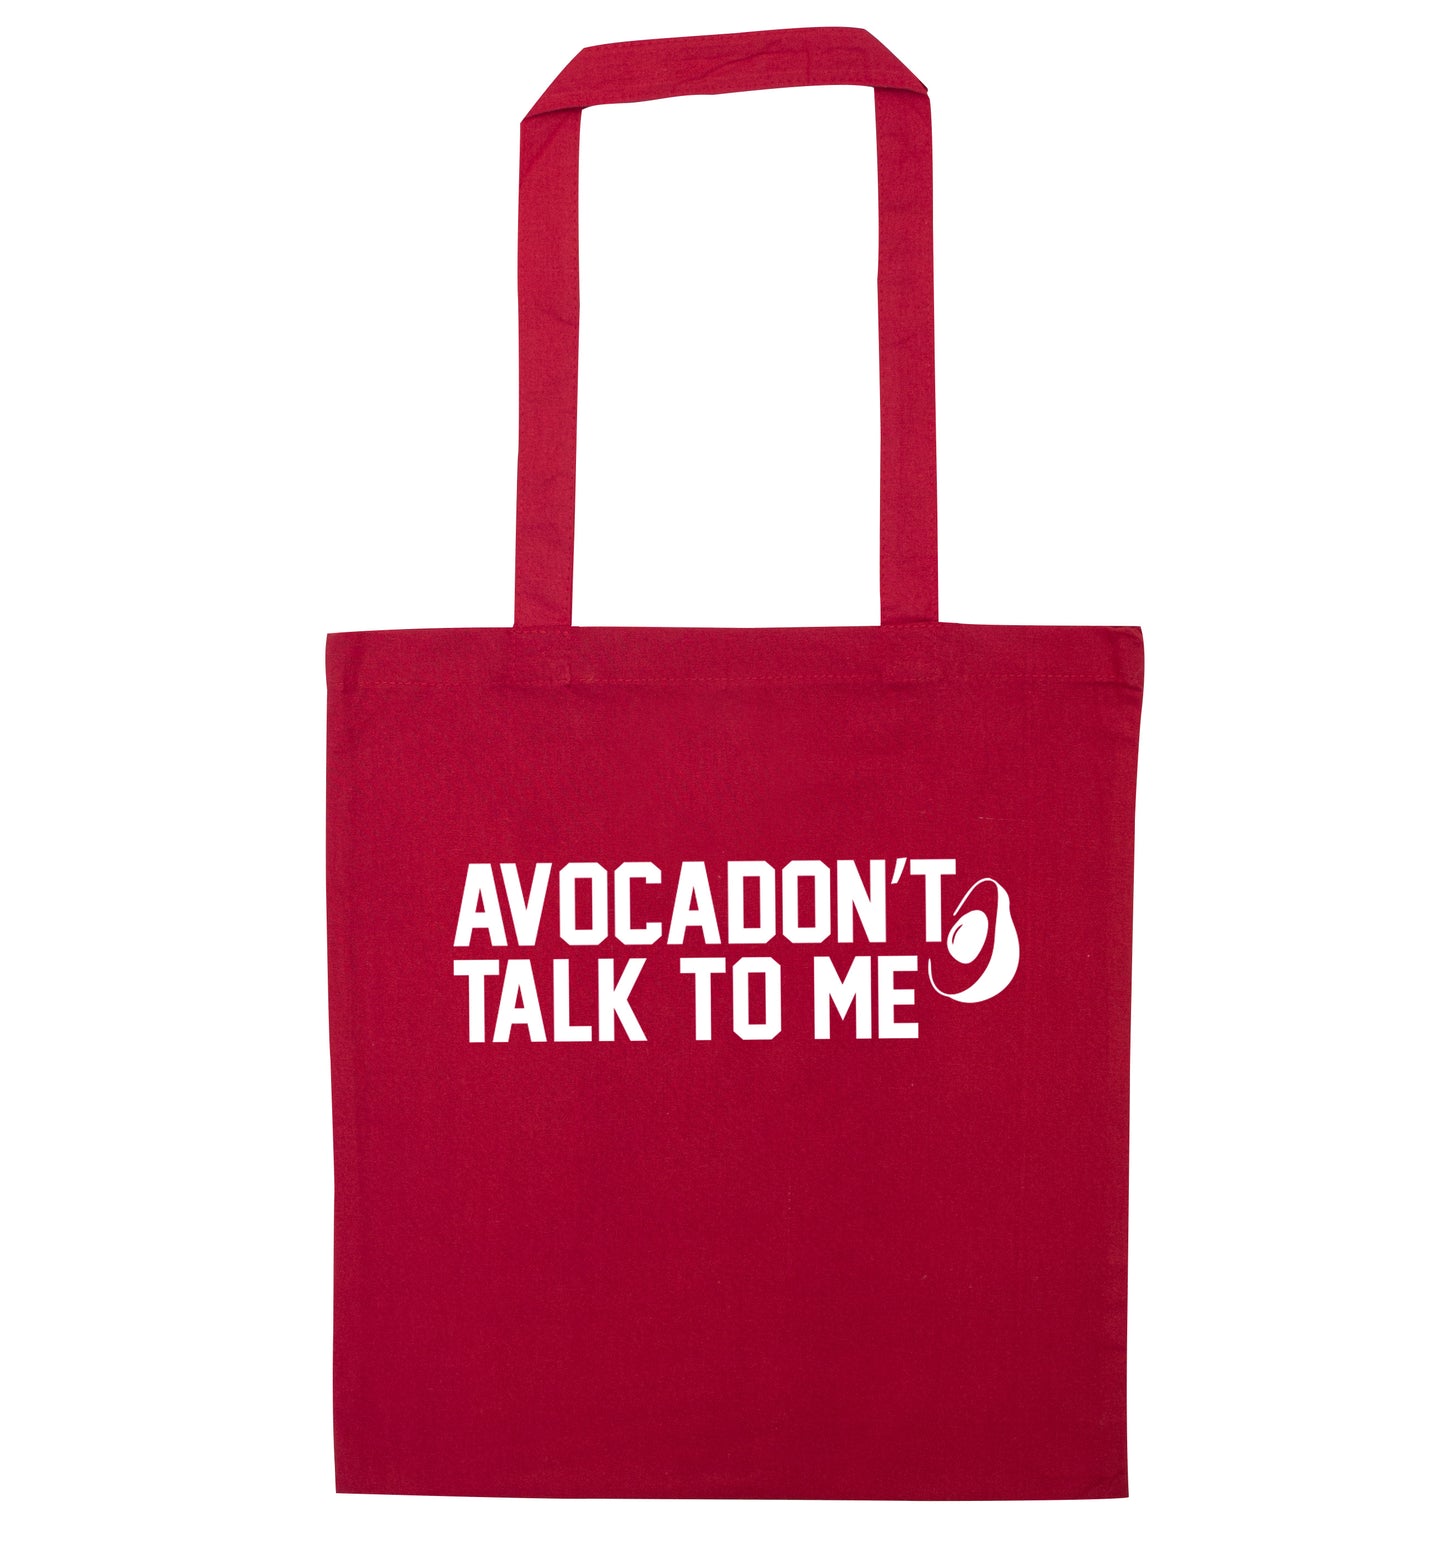 Avocadon't talk to me red tote bag